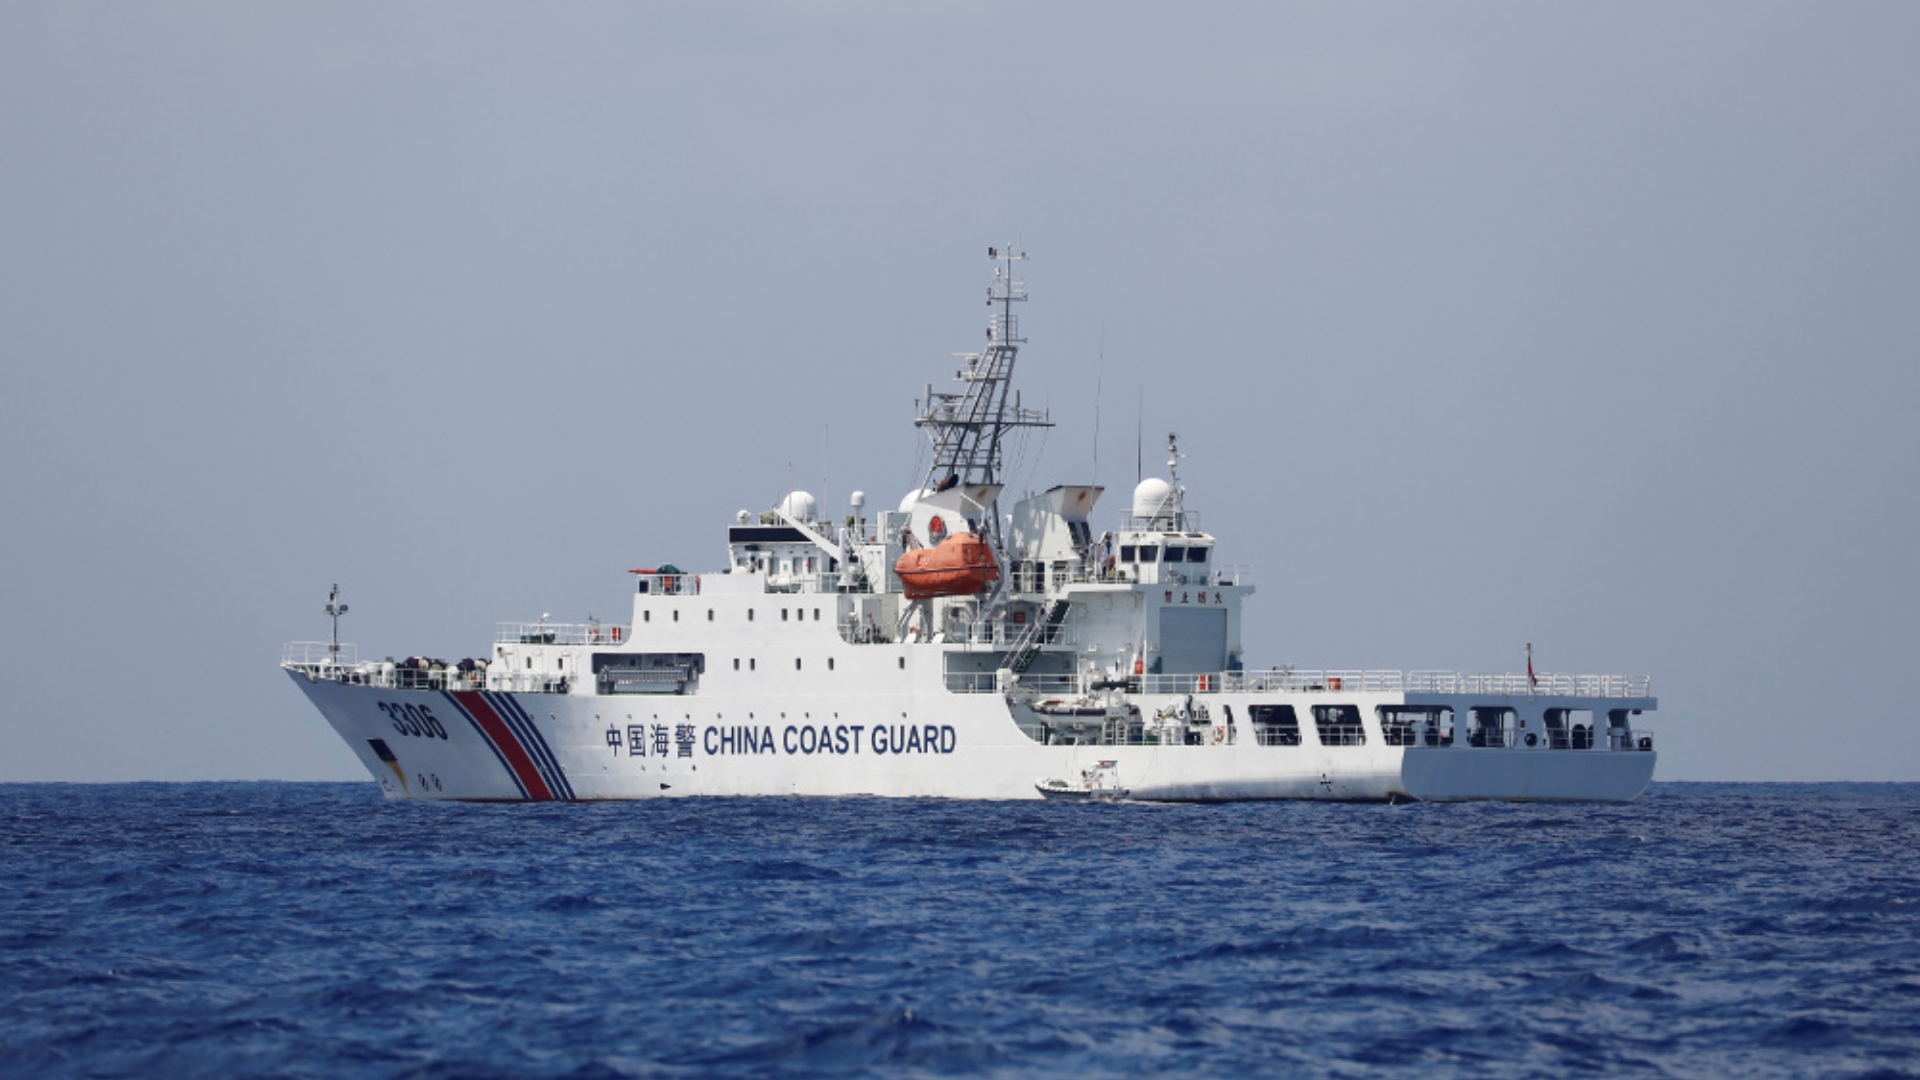 The Coast Guard has informed the Senate that China may be spreading false information about the WPS dispute.